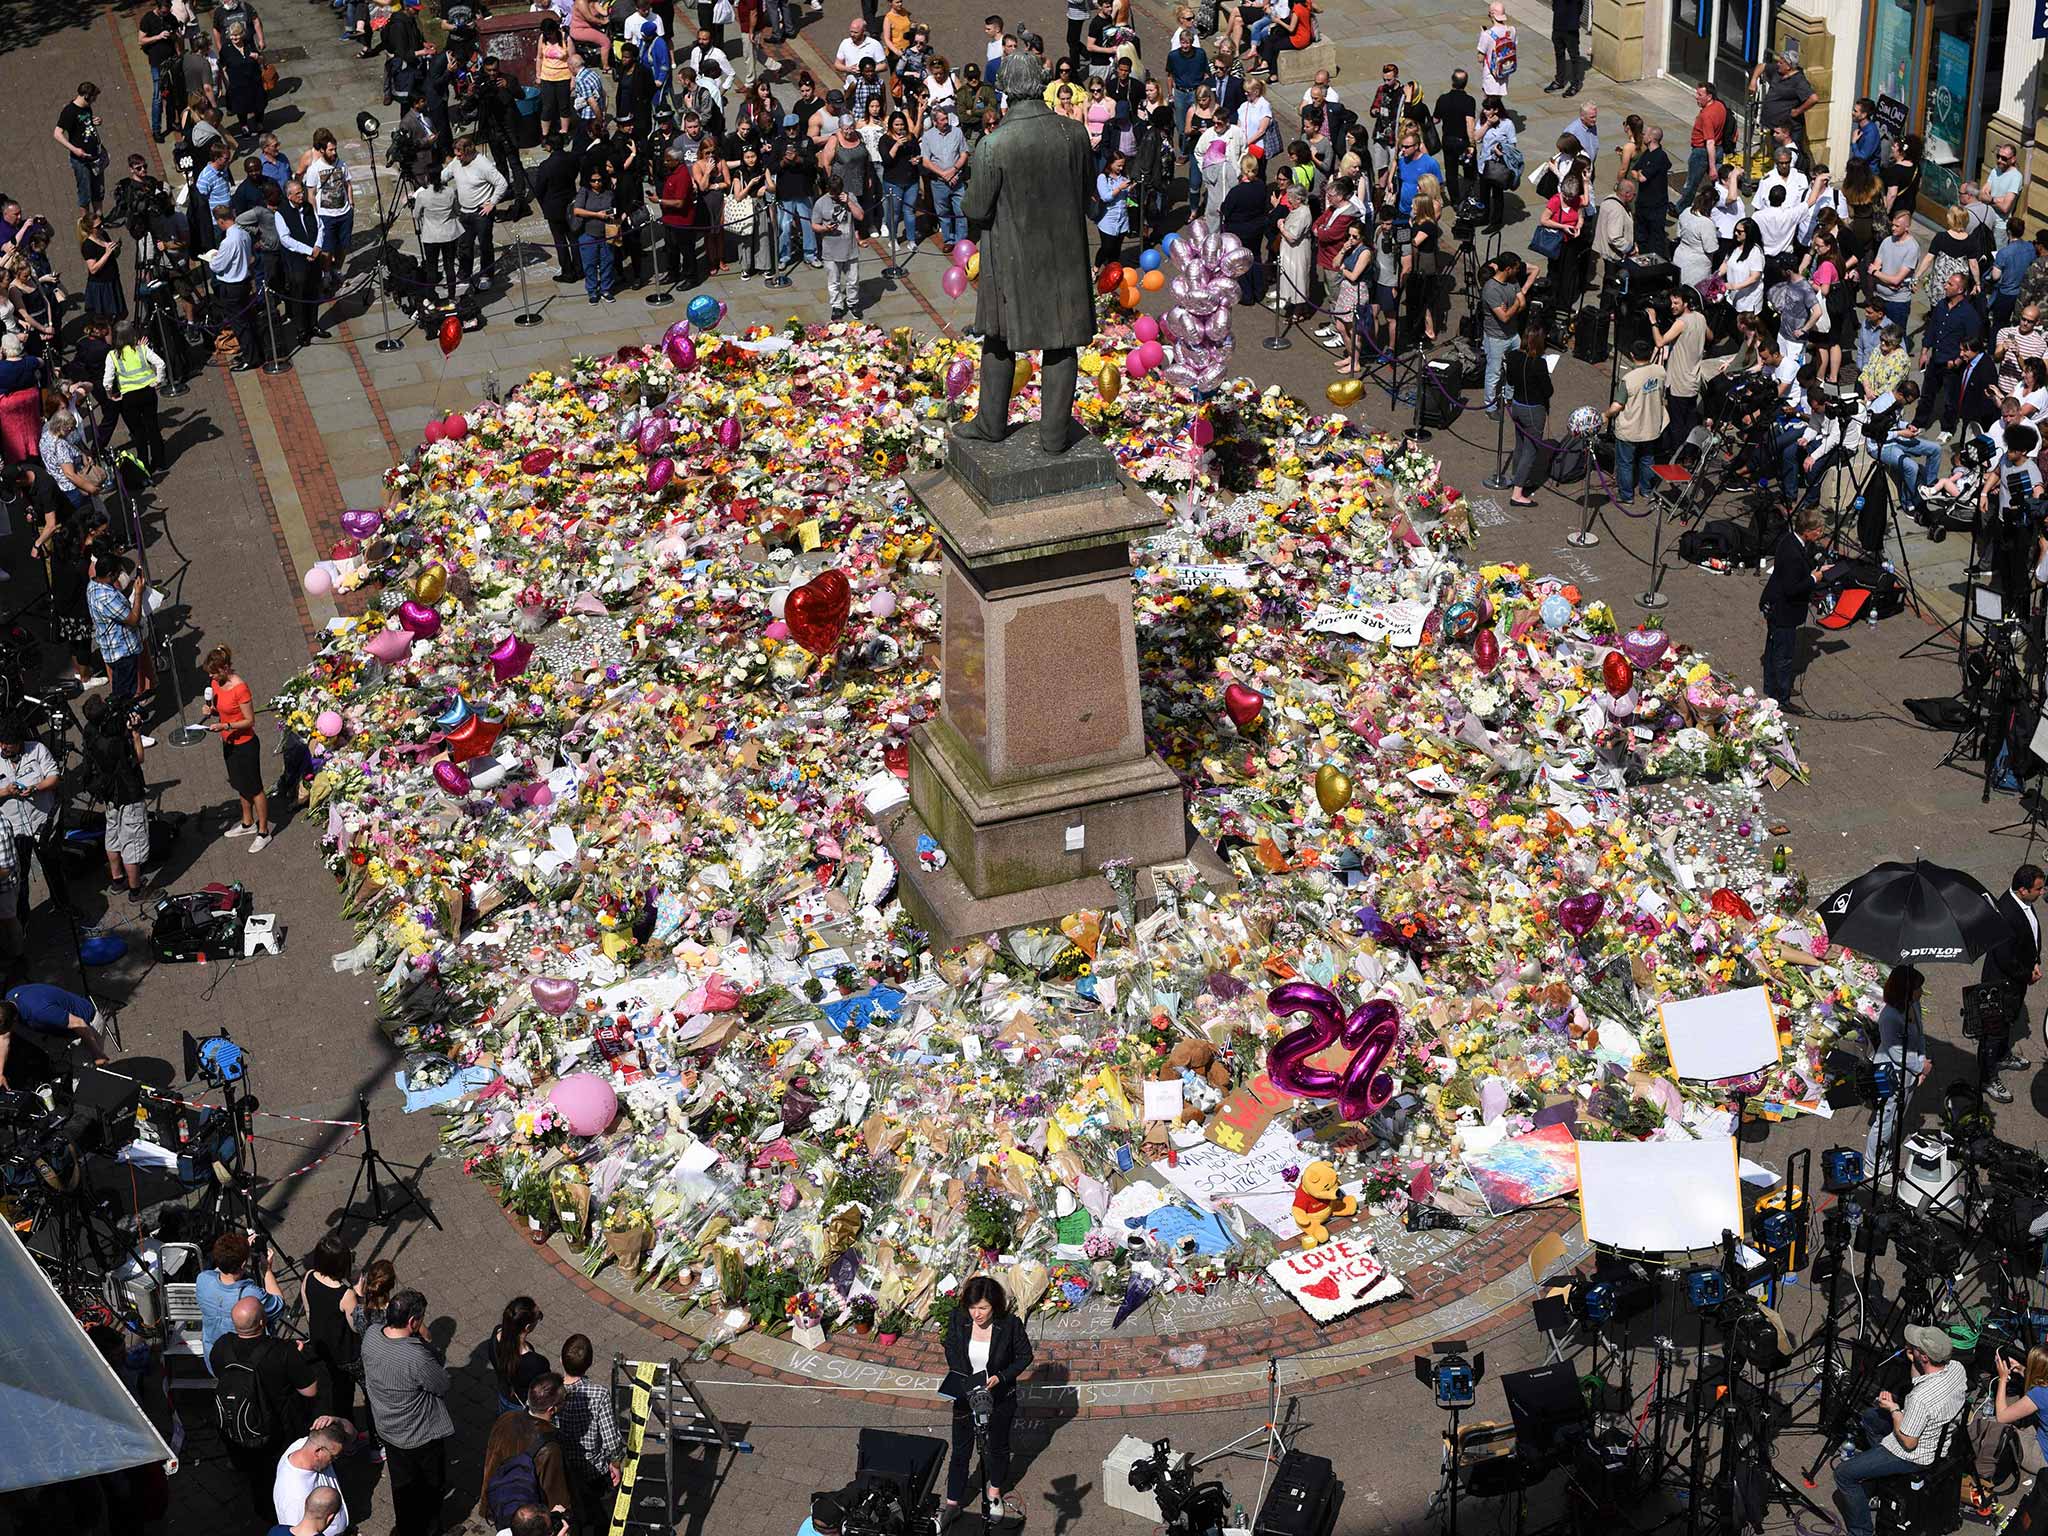 Tributes were laid in the city centre in the aftermath of the atrocity